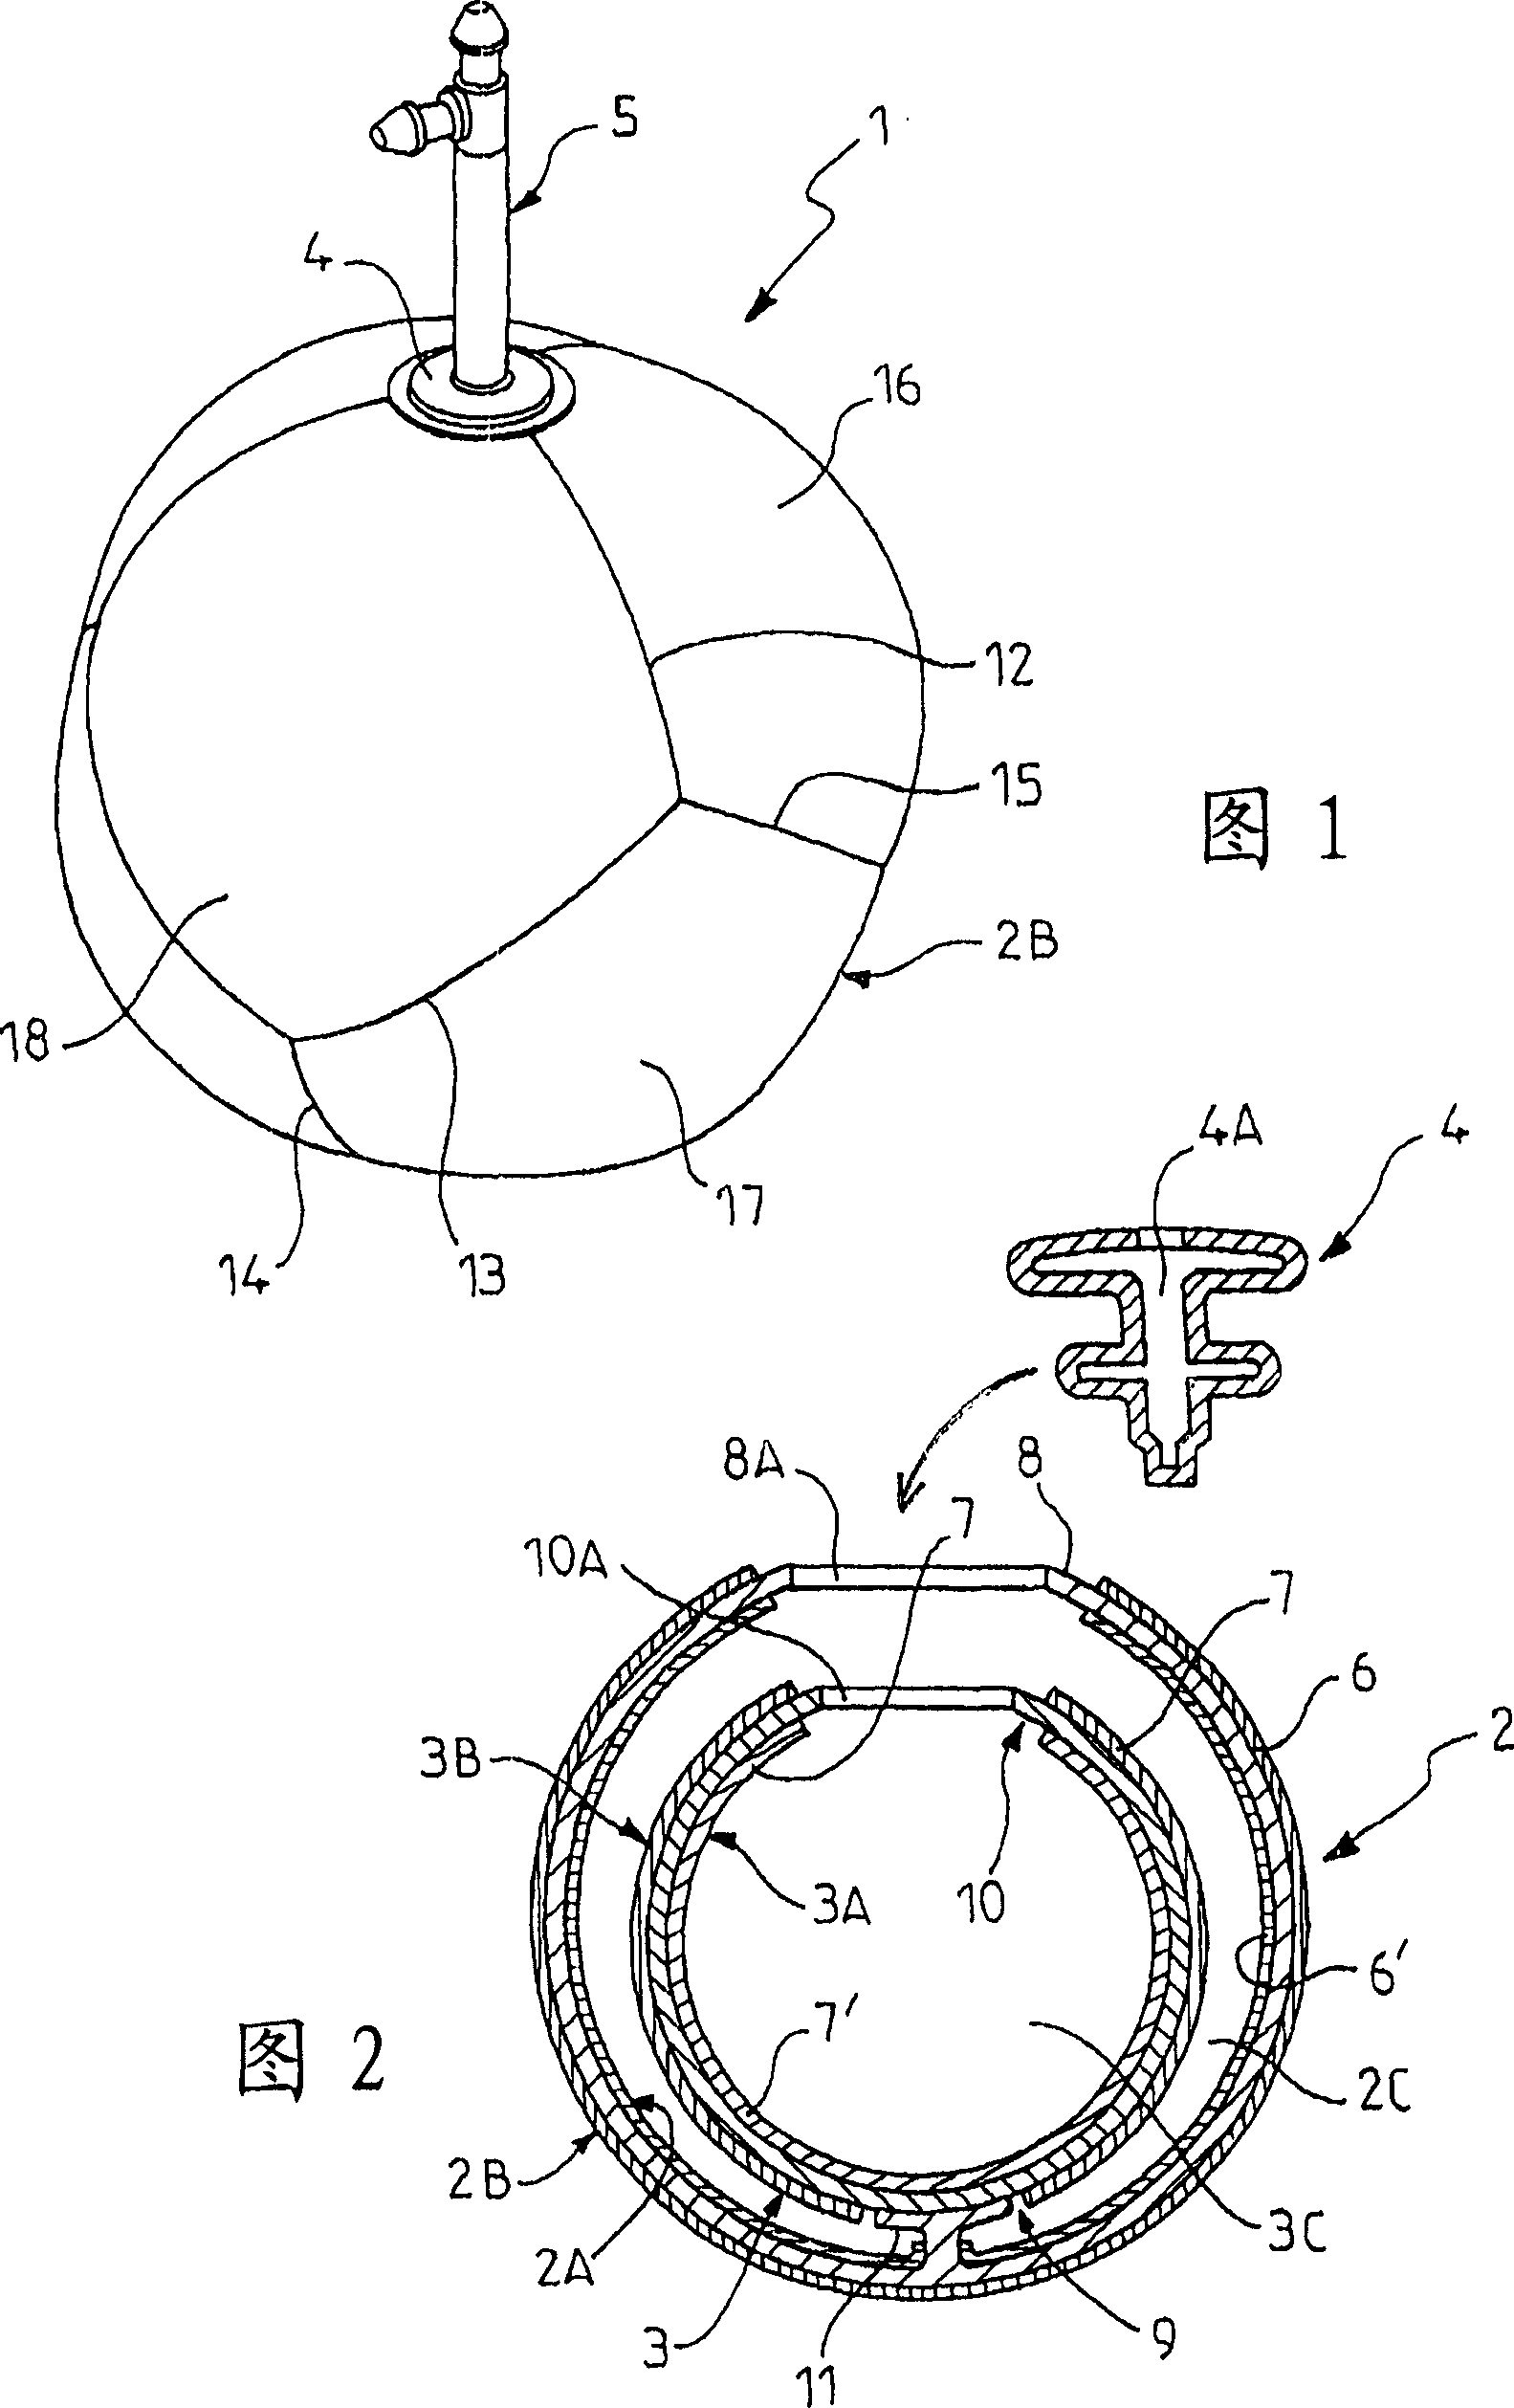 Intragastric balloon coated with parylene, method for production of such a balloon and use of parylene for coating an intragastric balloon